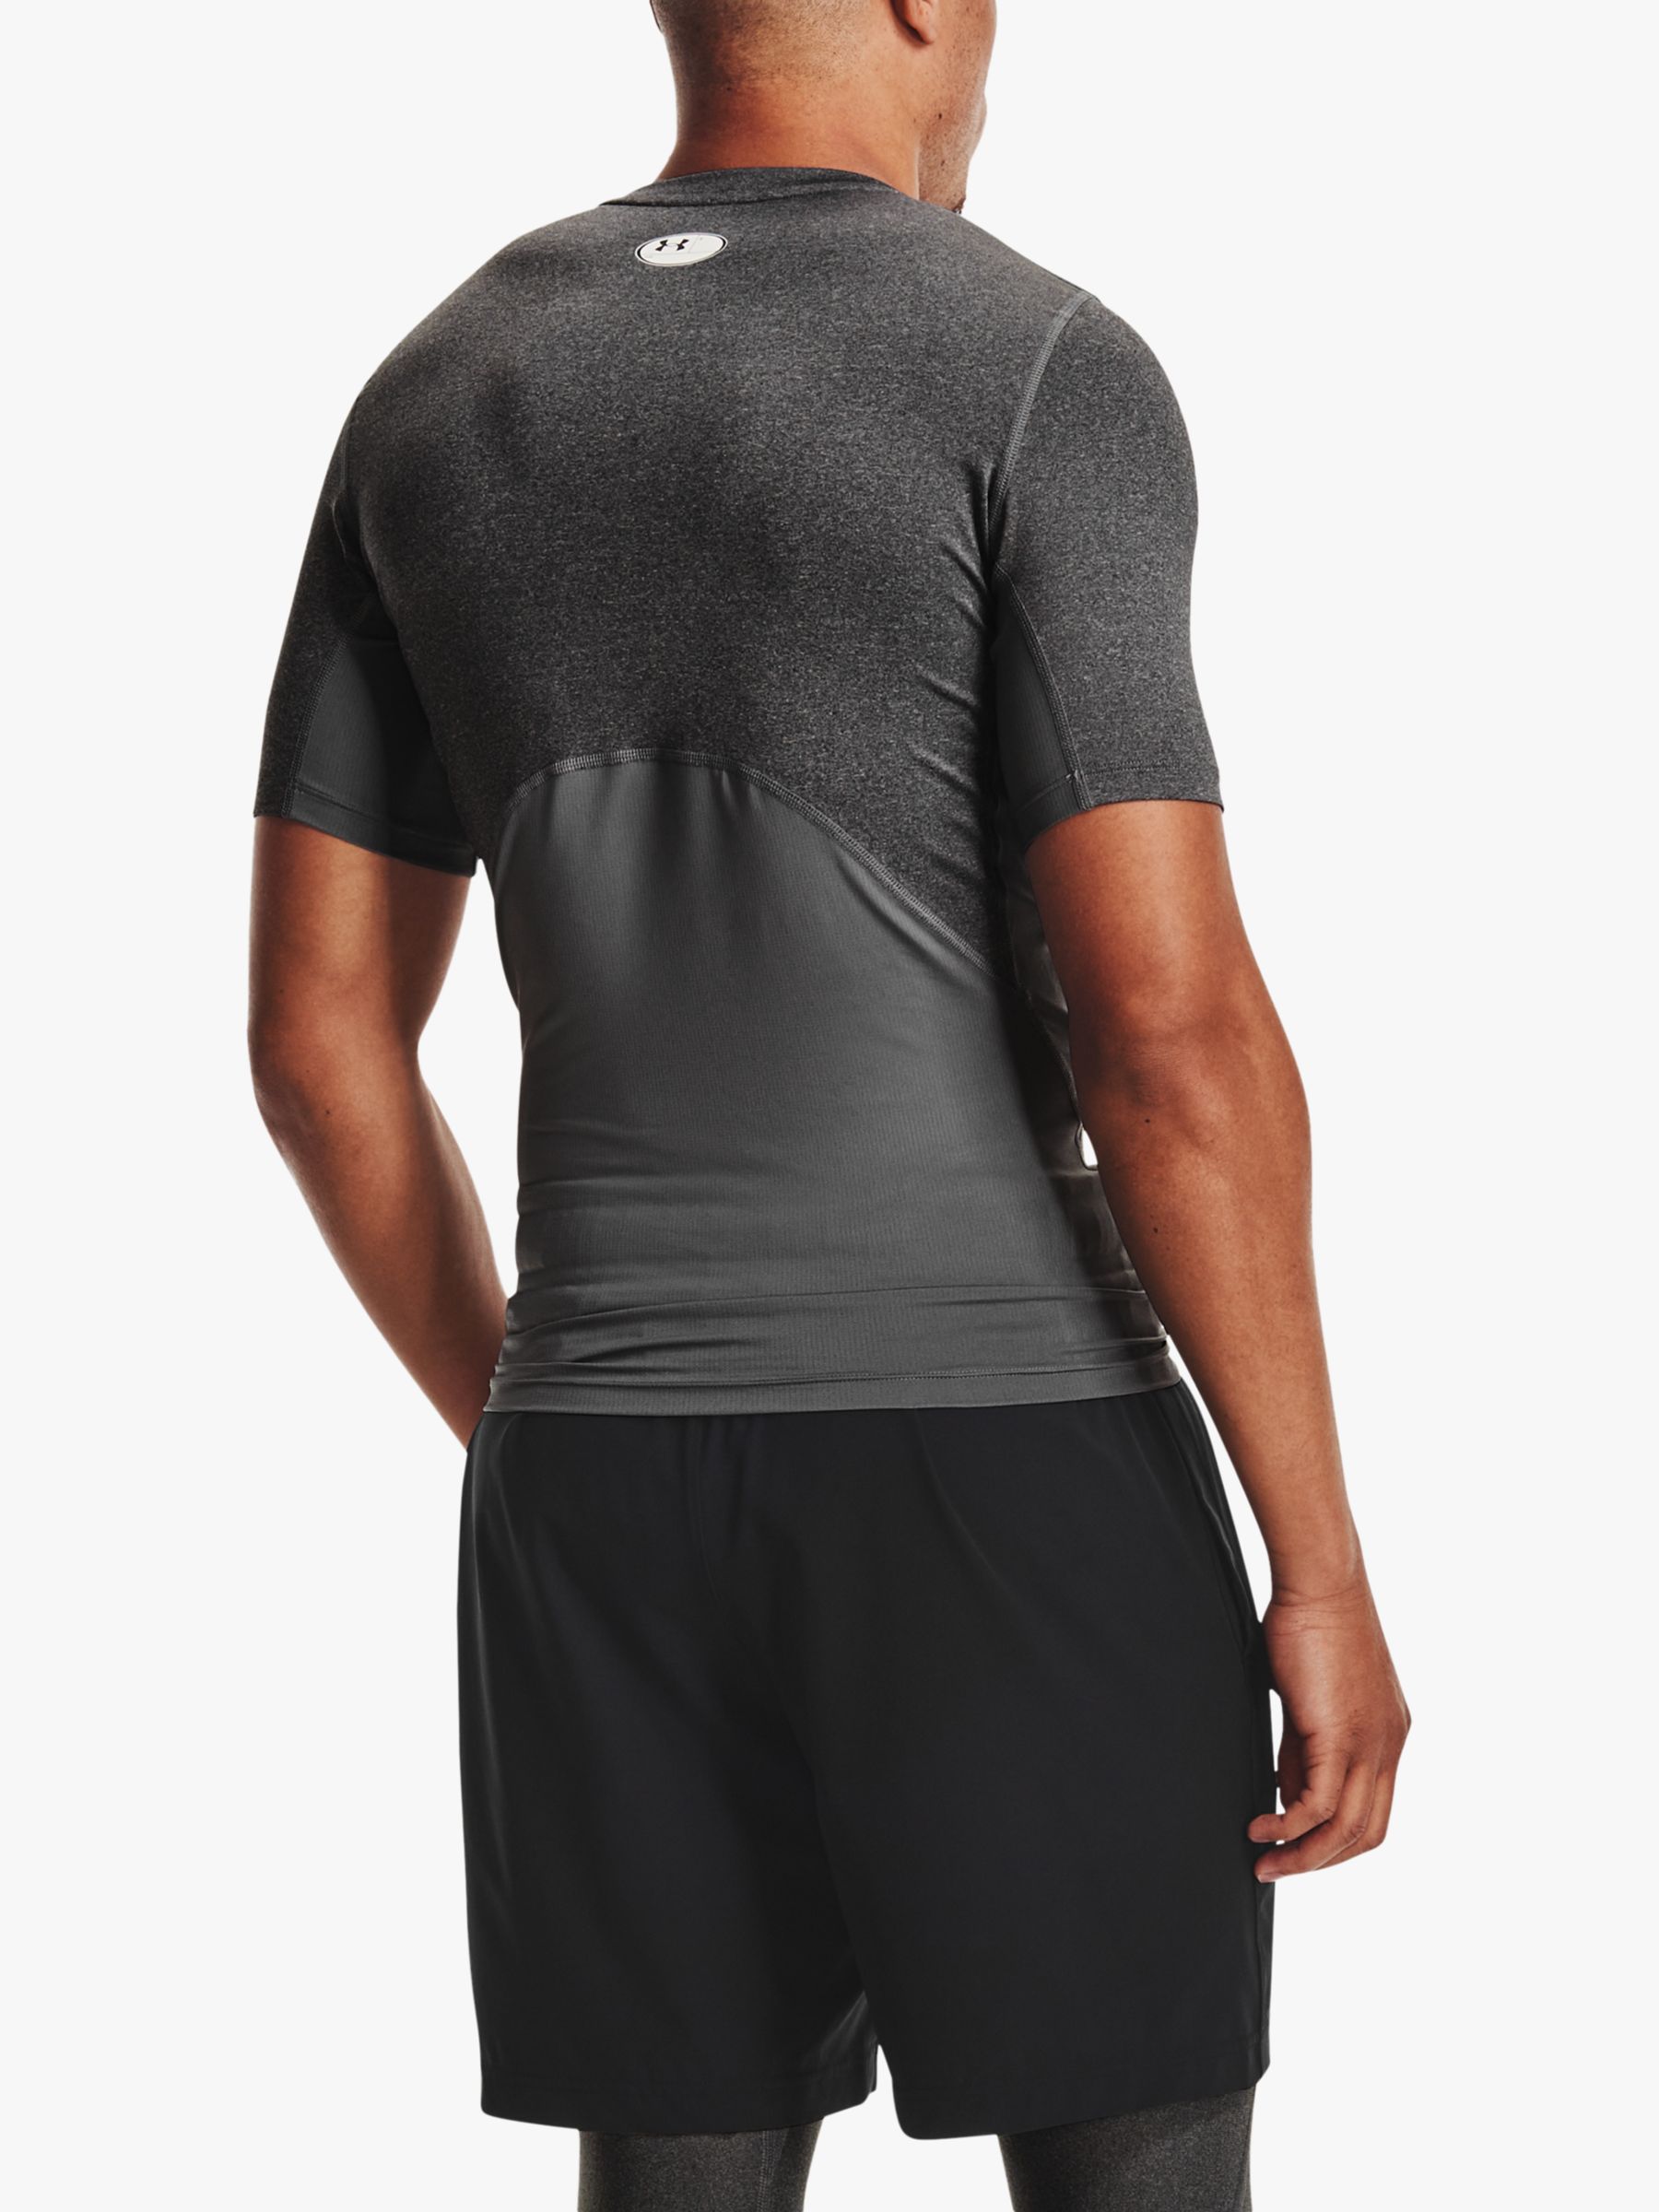 Purchase the Under Armour HeatGear Compression Short Sleeve whit